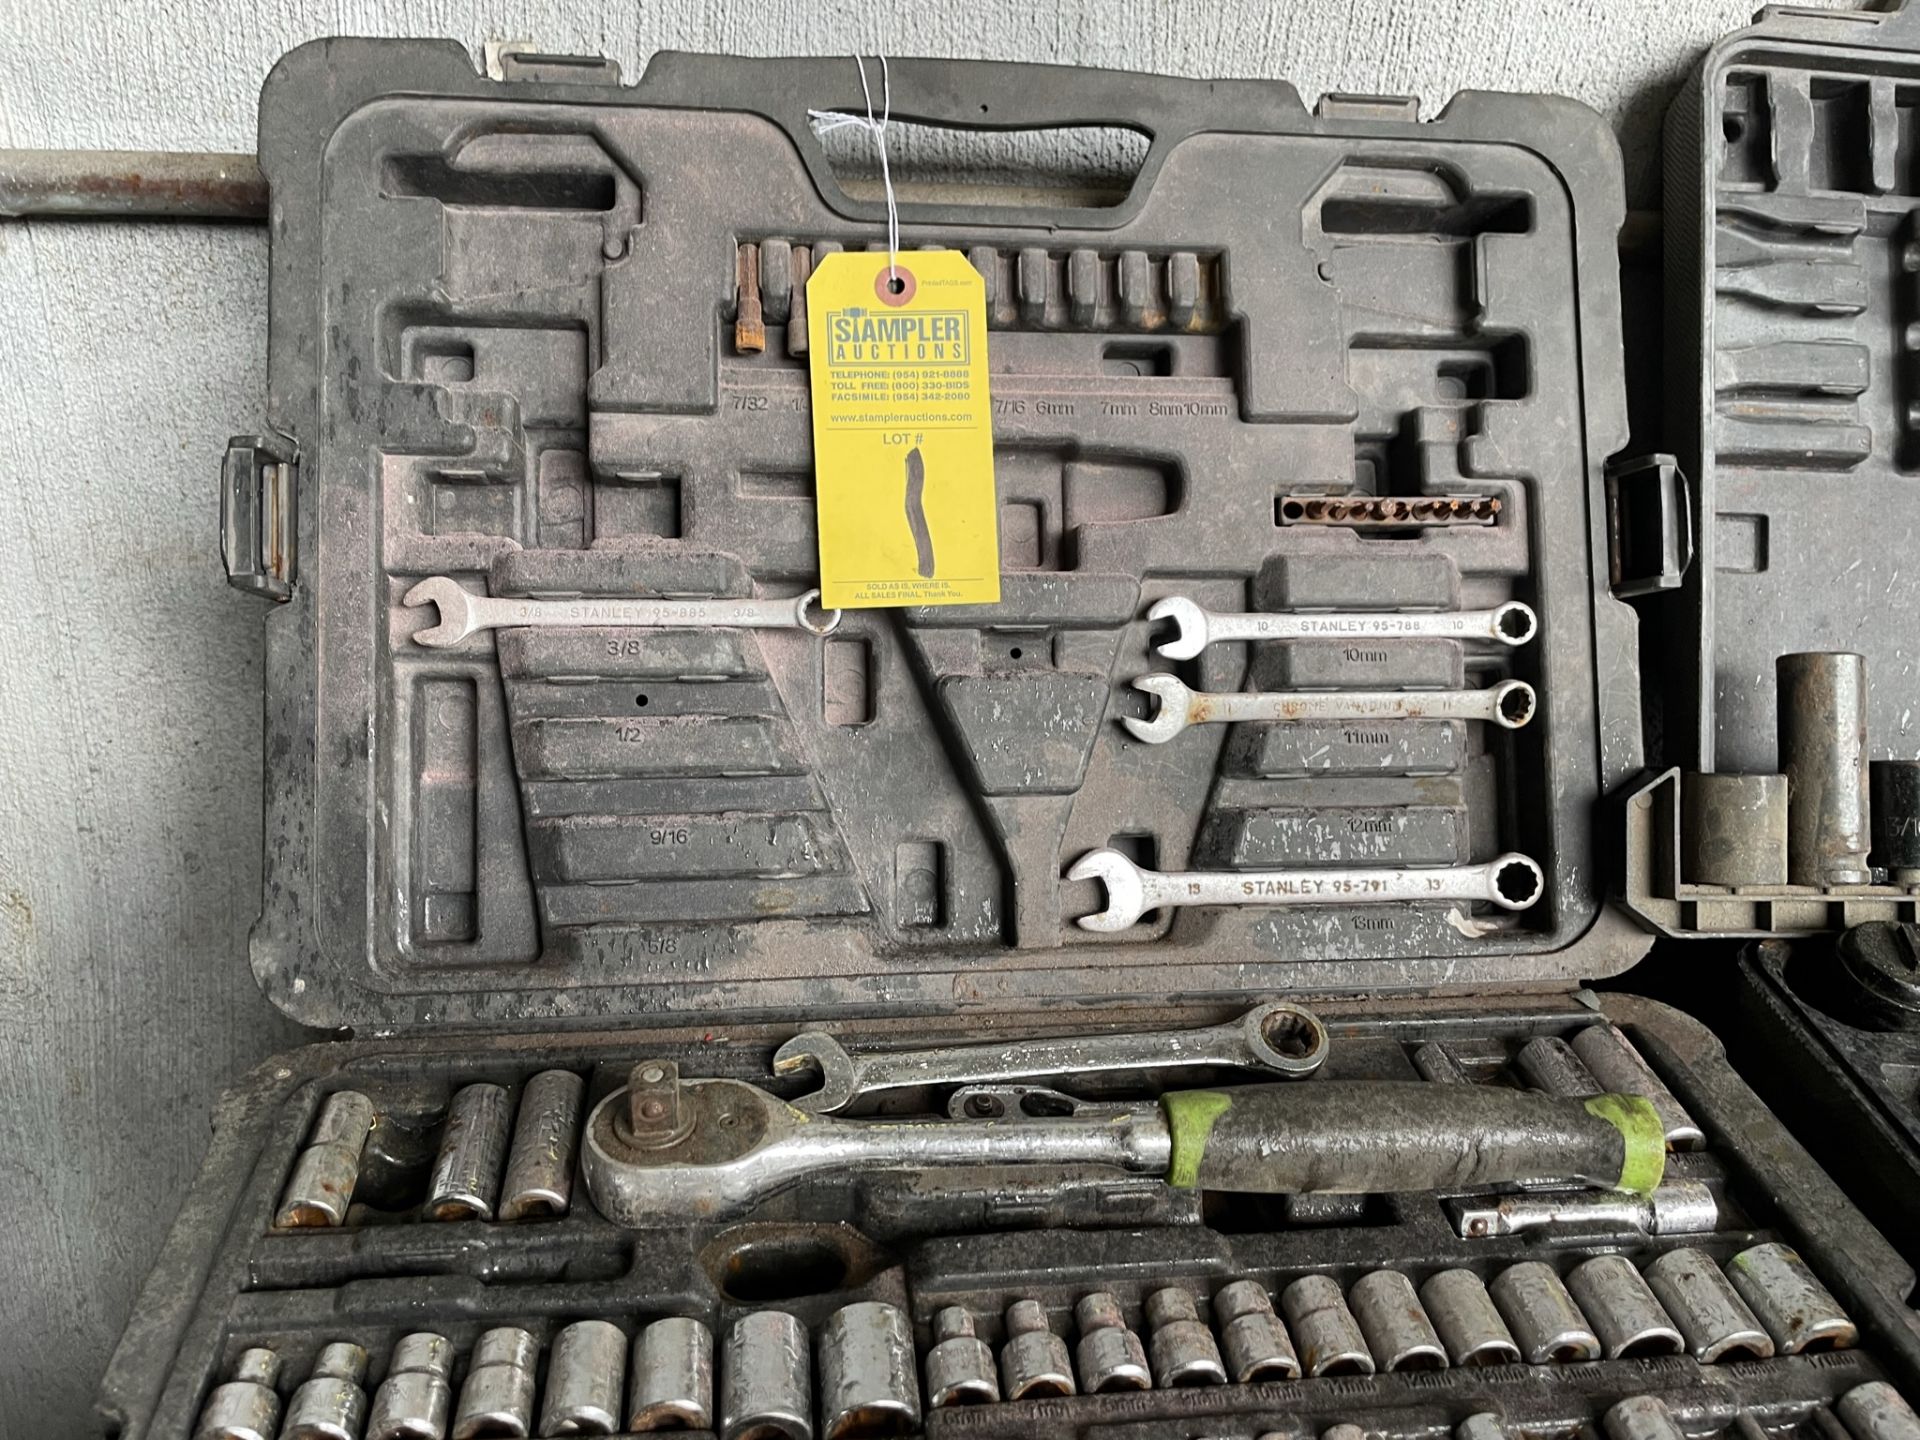 LOT ASSORTED TOOLS WITH CASE - SOCKETS, COMBO WRENCHES, RATCHETS, ETC - STANLEY & MORE - OVER 70 PIE